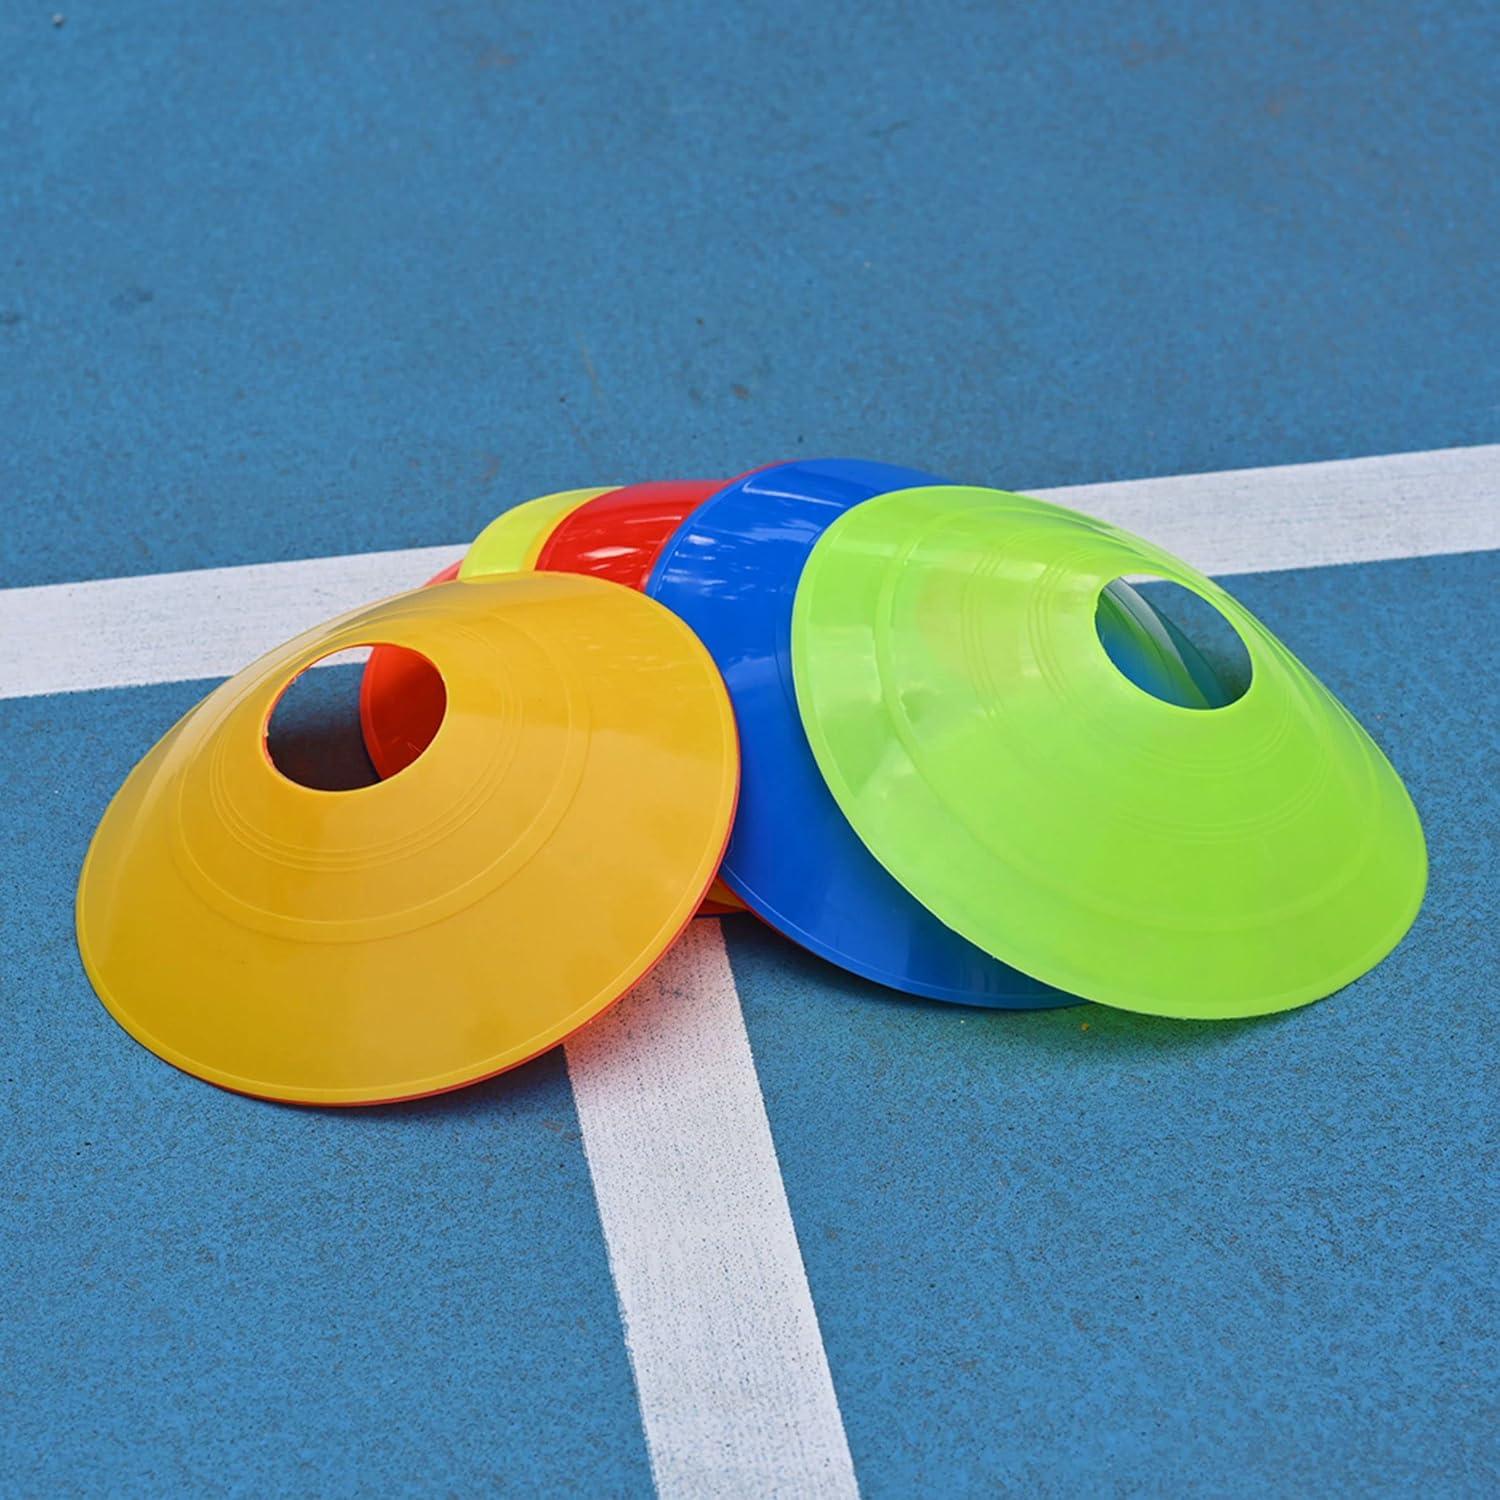 Marking Plots For Football Cone, Disc Shaped Cones For Football Training,  Comes With Stand, 5 Colors.